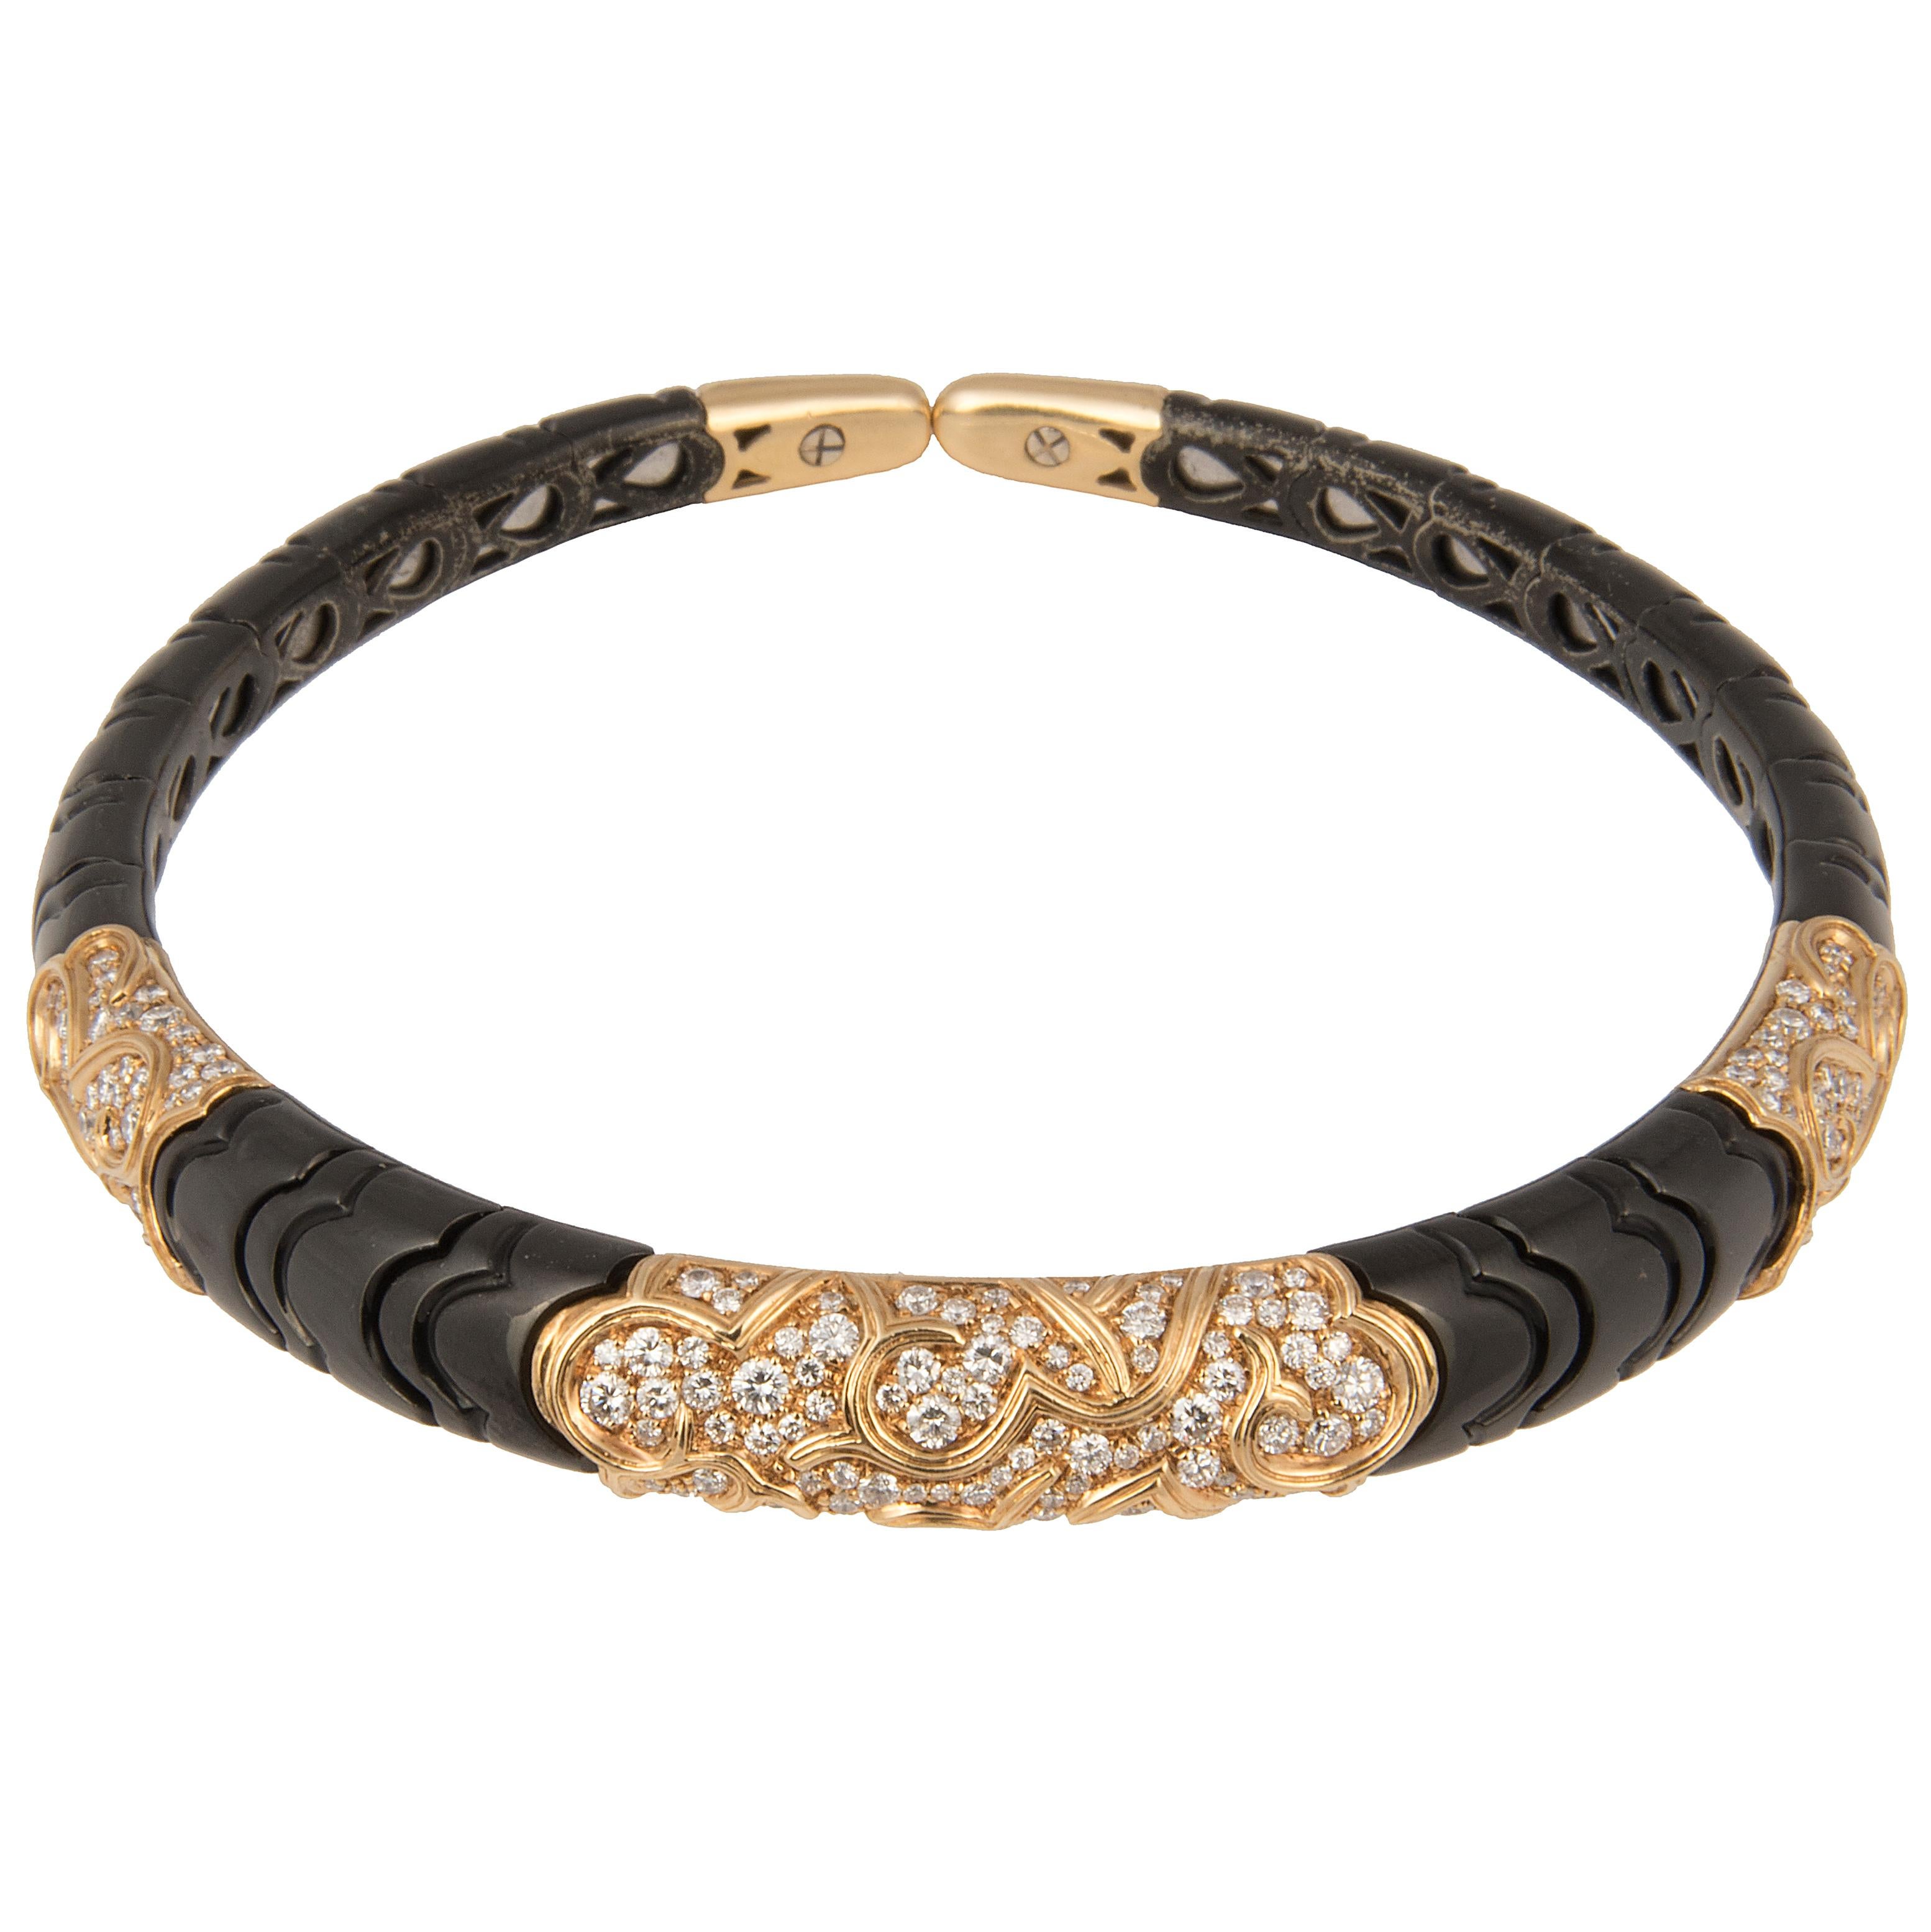 Marina B choker necklace 'Onda', 18k yellow gold and black gold on a steel spring, decorated with three pavé set diamonds motifs.
Signed Marina B, markers mark, Italian hallmarks, numbered C1460.
Circa 1978

The Onda collection was created in 1978.